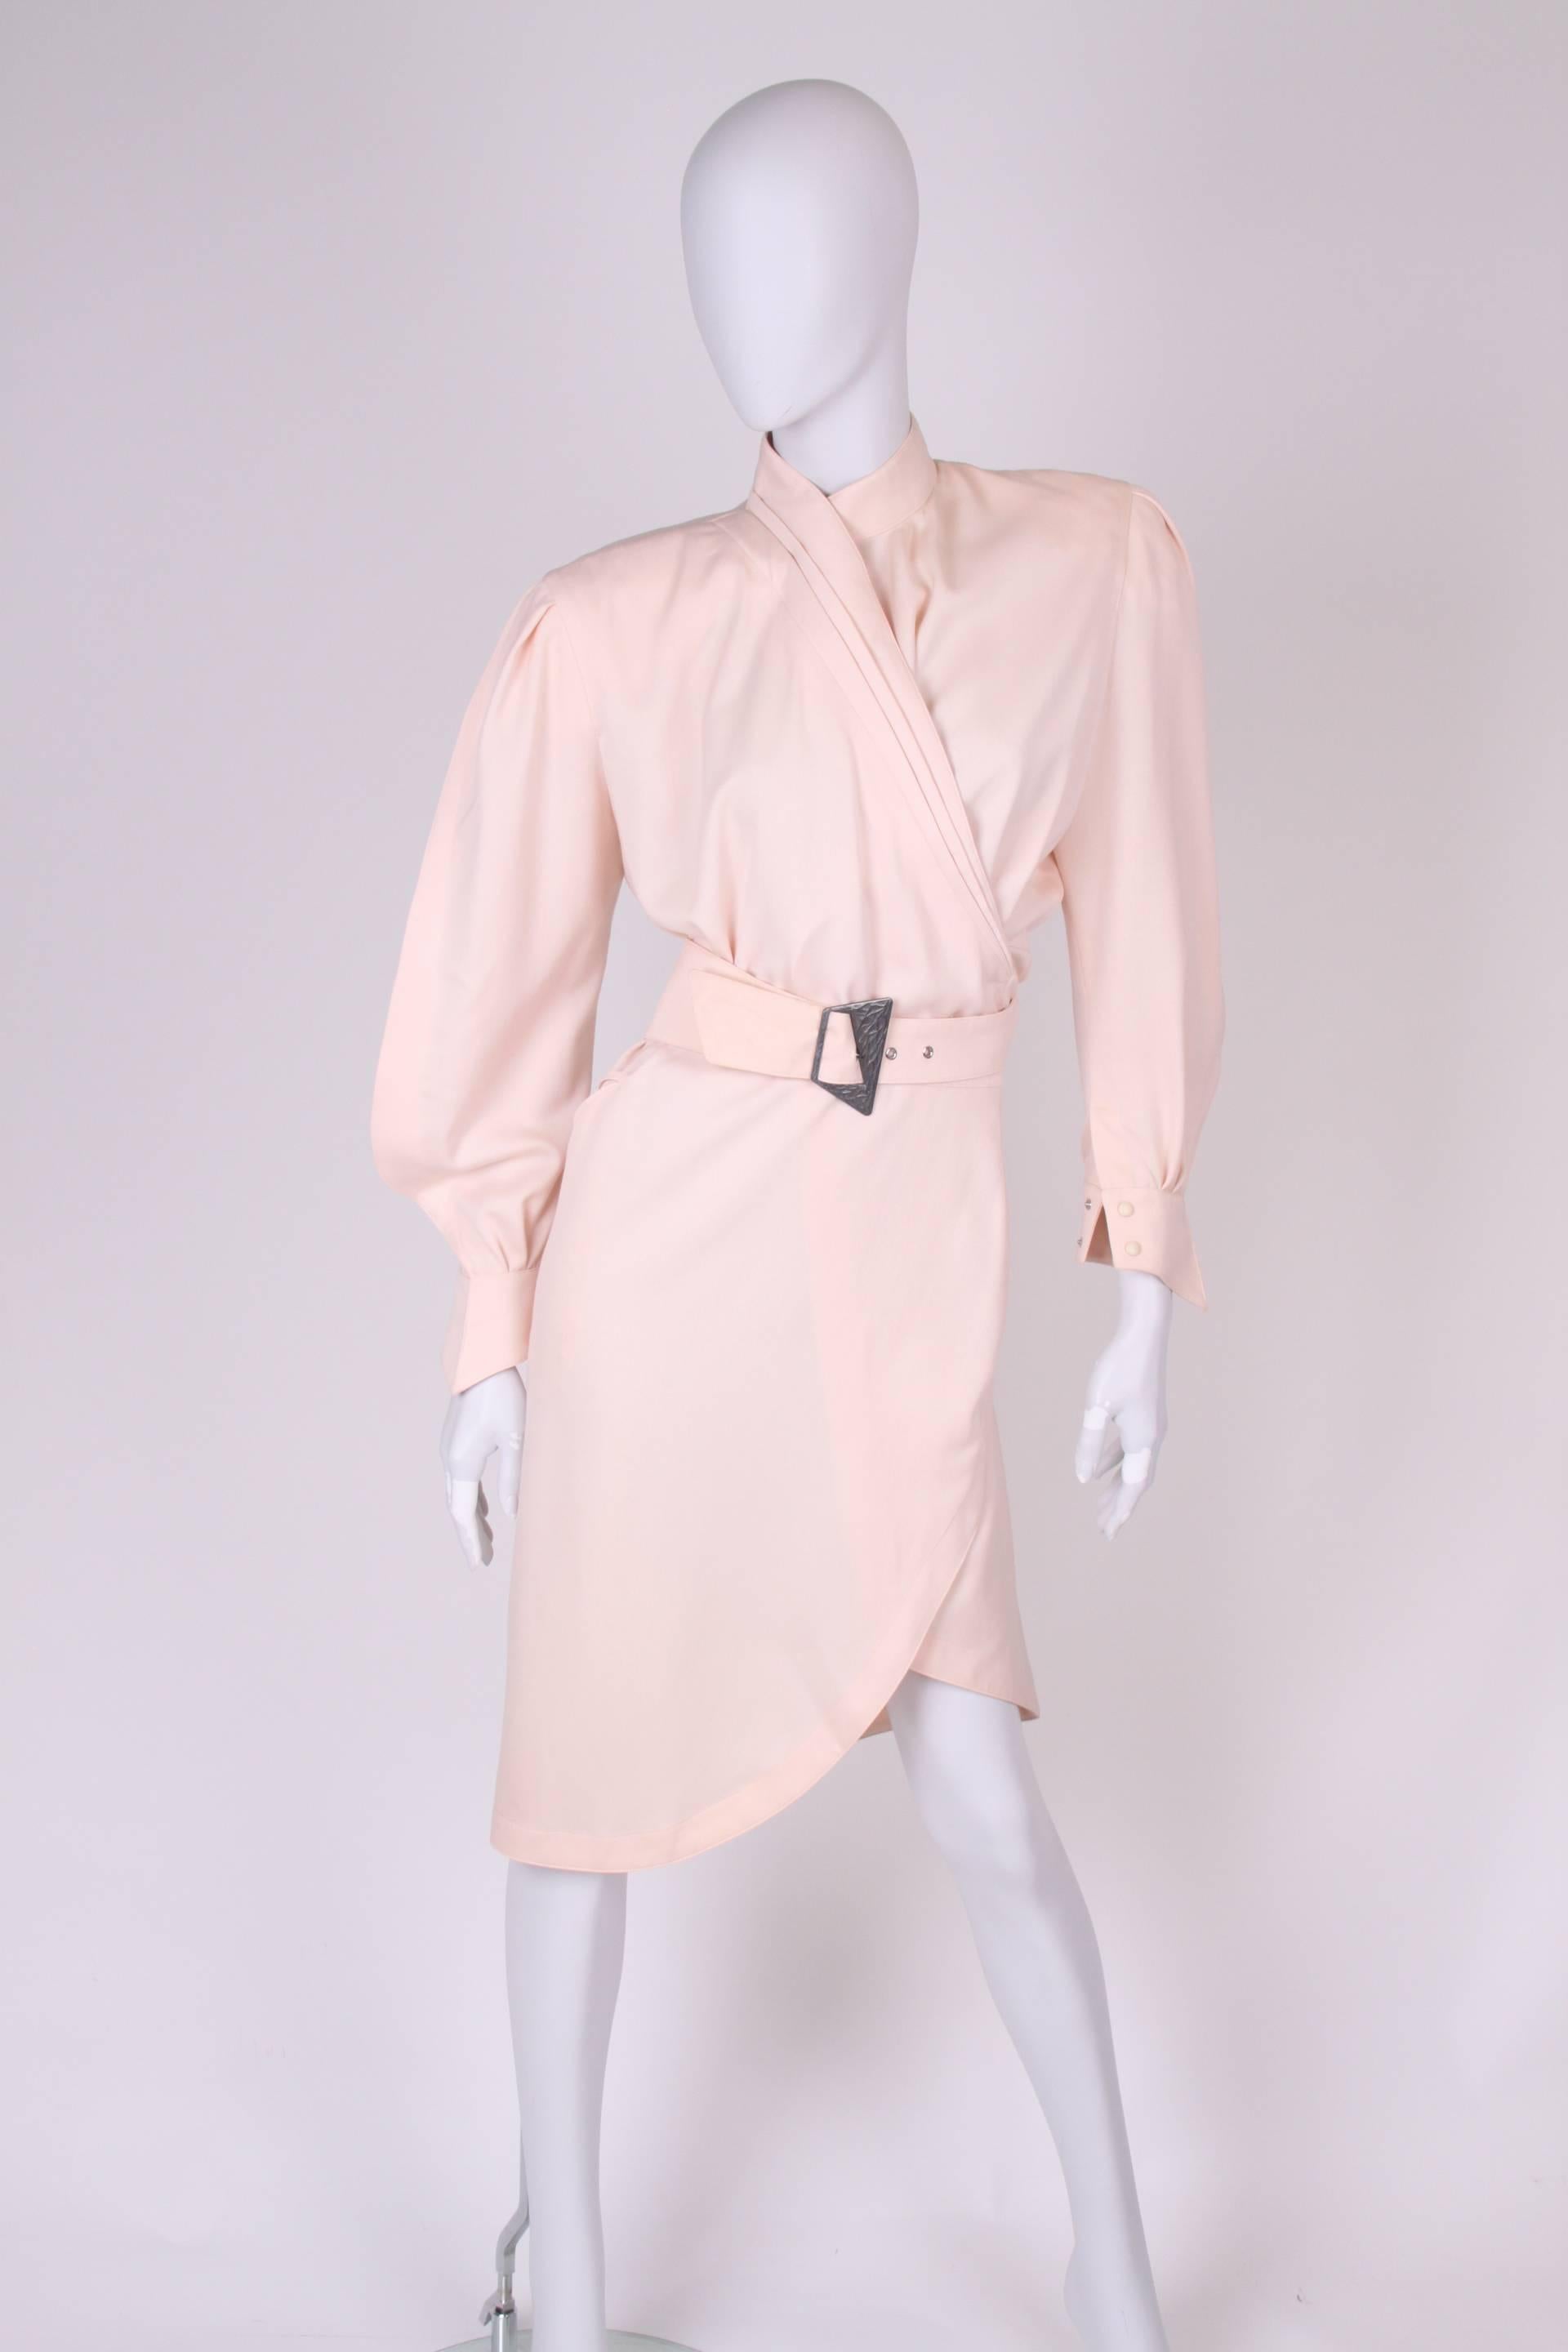 Vintage alert! Straight from the eighties: a salmon pink wrap dress by Thierry Mugler. We love it!

This high necked dress has more than knee length and has a matte silver buckle closure. Two welt pockets on the hips. No lining, large padding in the